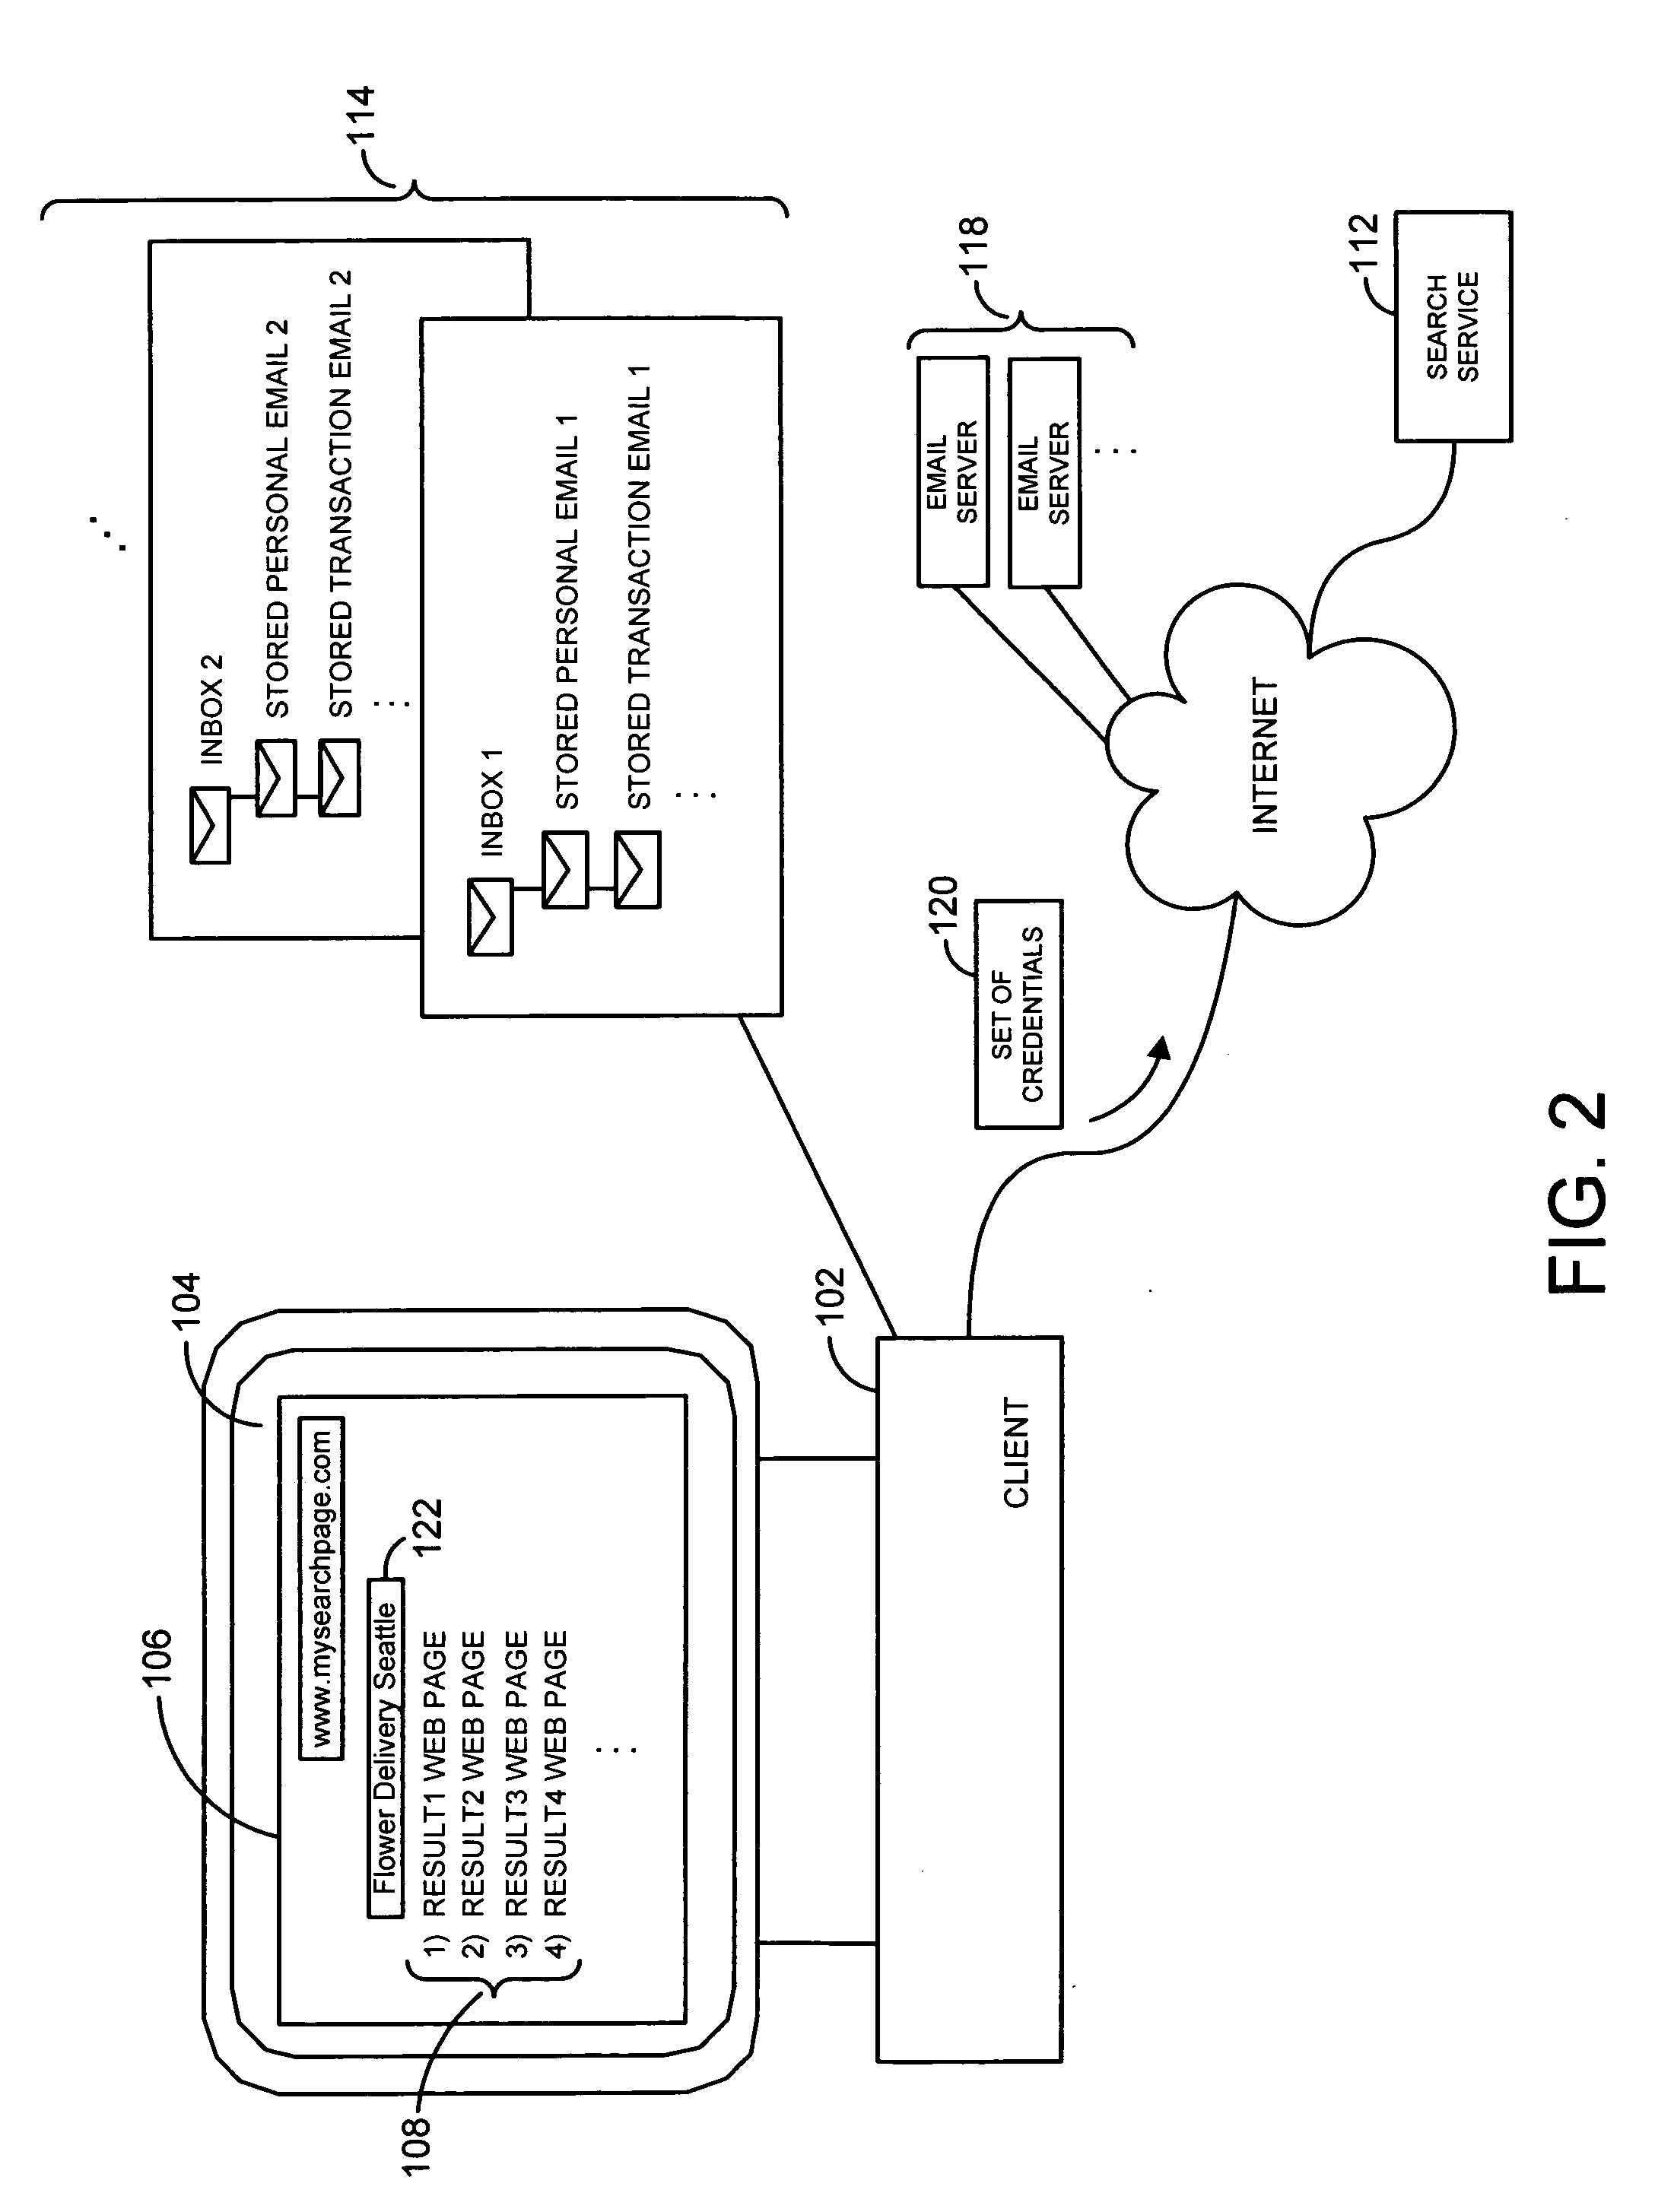 System and method for simultaneous search service and email search